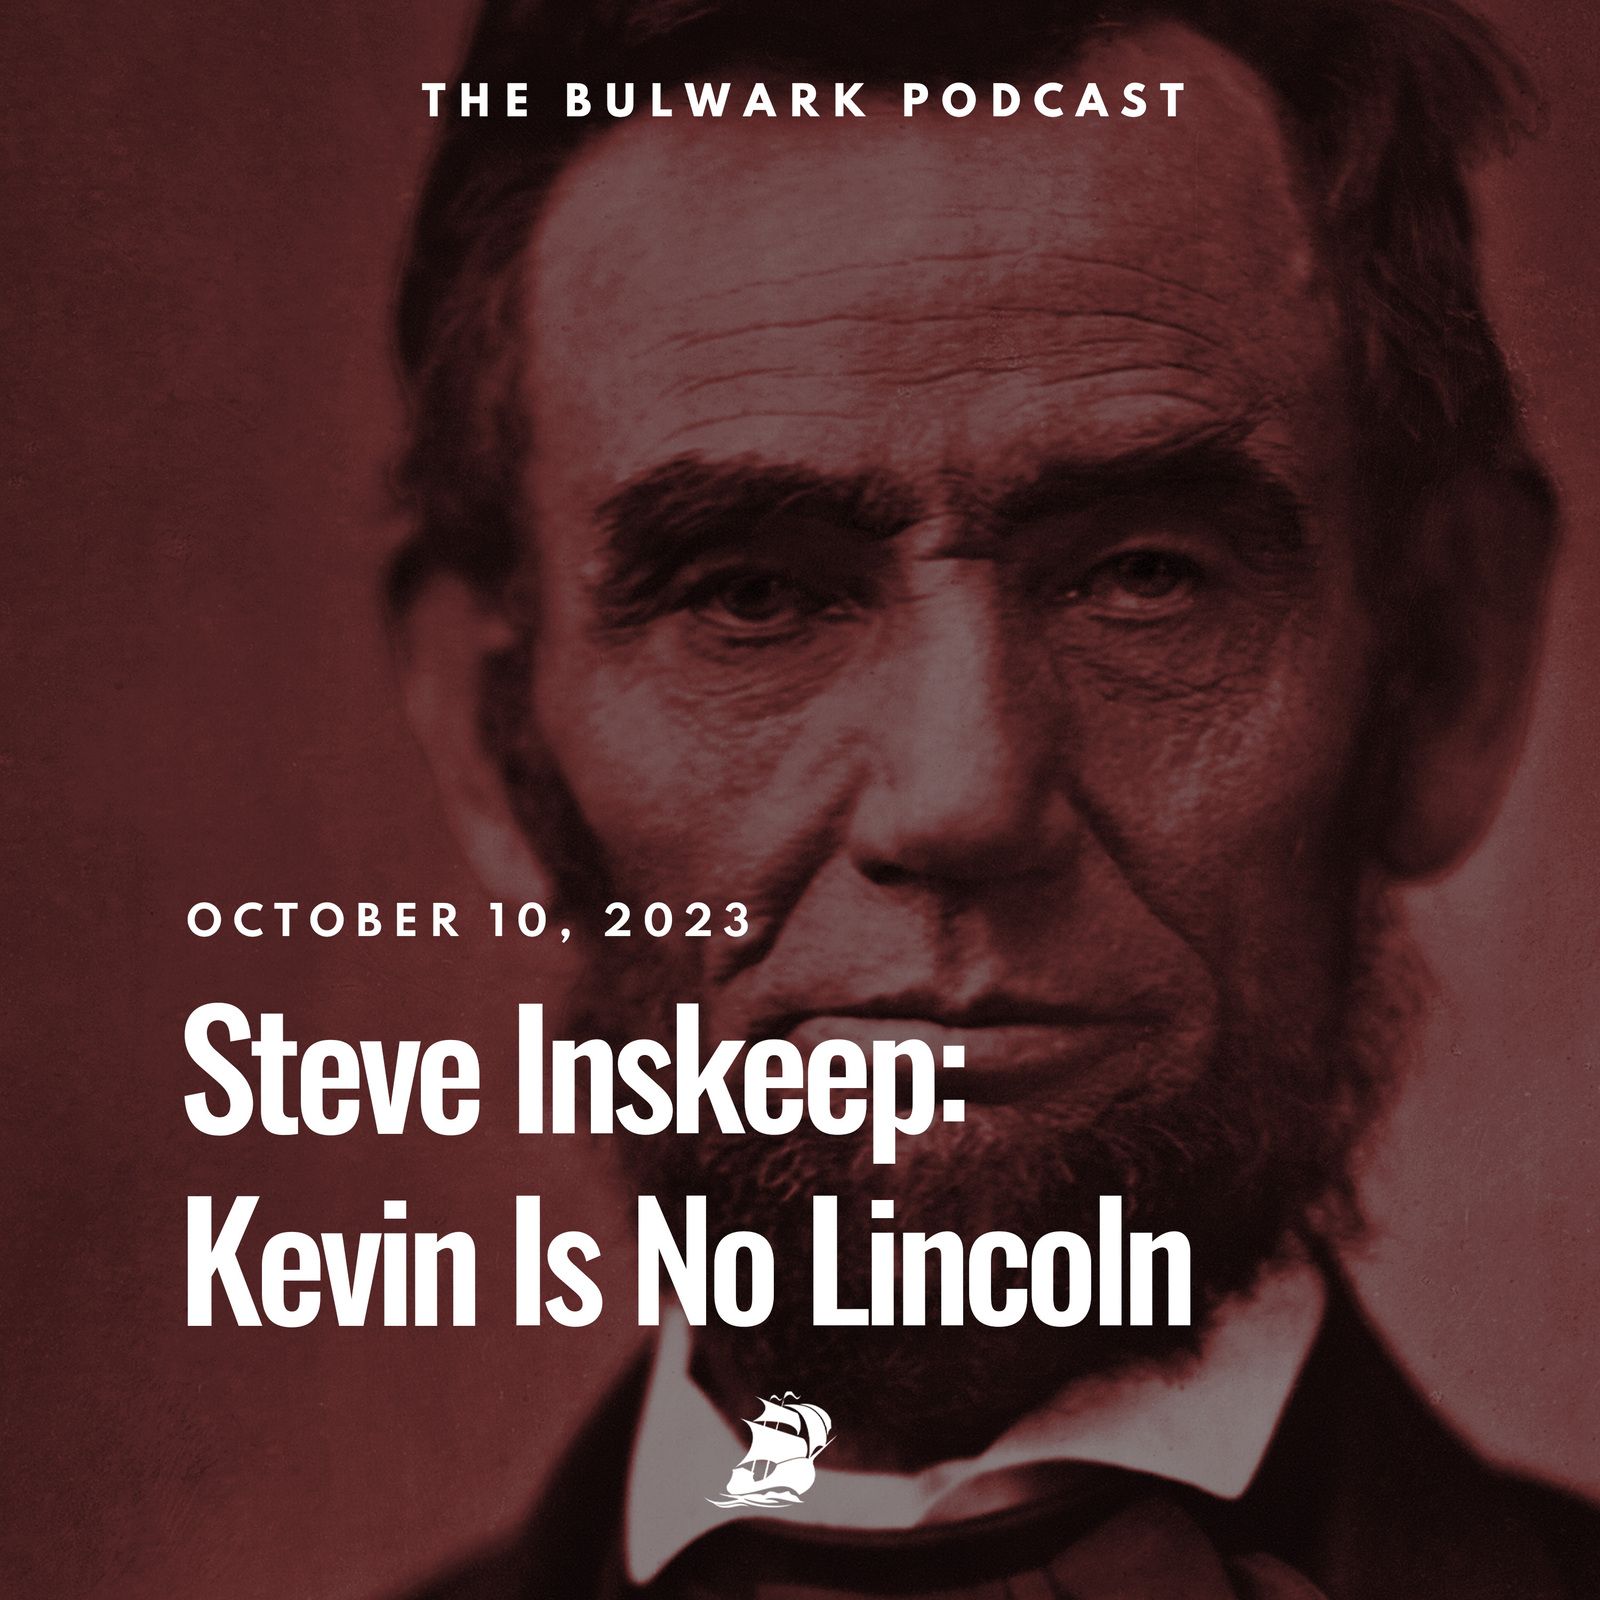 Steve Inskeep: Kevin Is No Lincoln